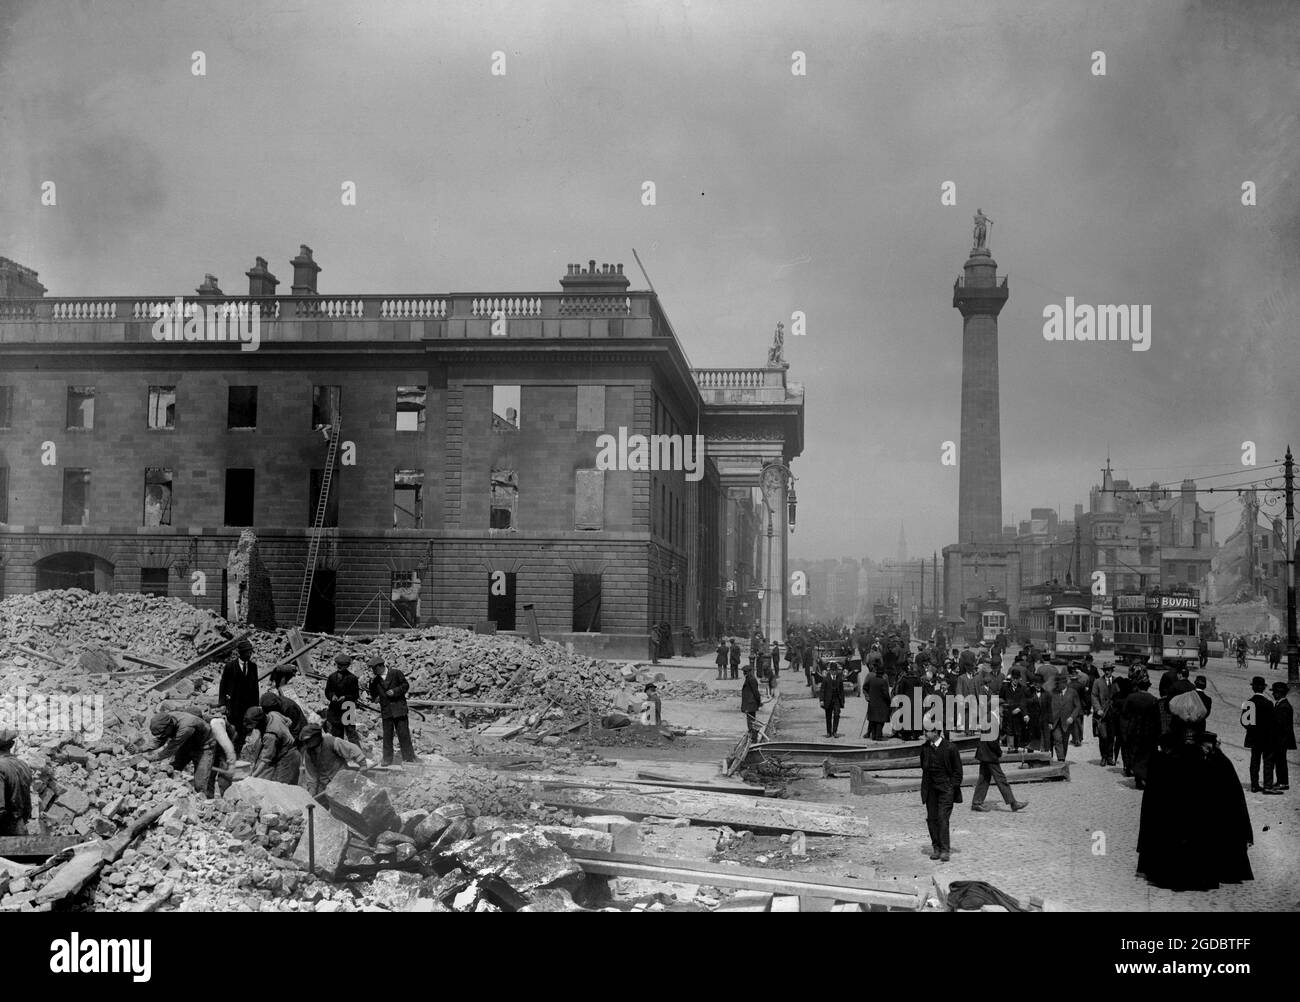 DUBLIN, IRELAND - Circa May 1916 - The shell of the G.P.O. on Sackville Street (later O'Connell Street) in Dublin, Ireland in the aftermath of the 191 Stock Photo